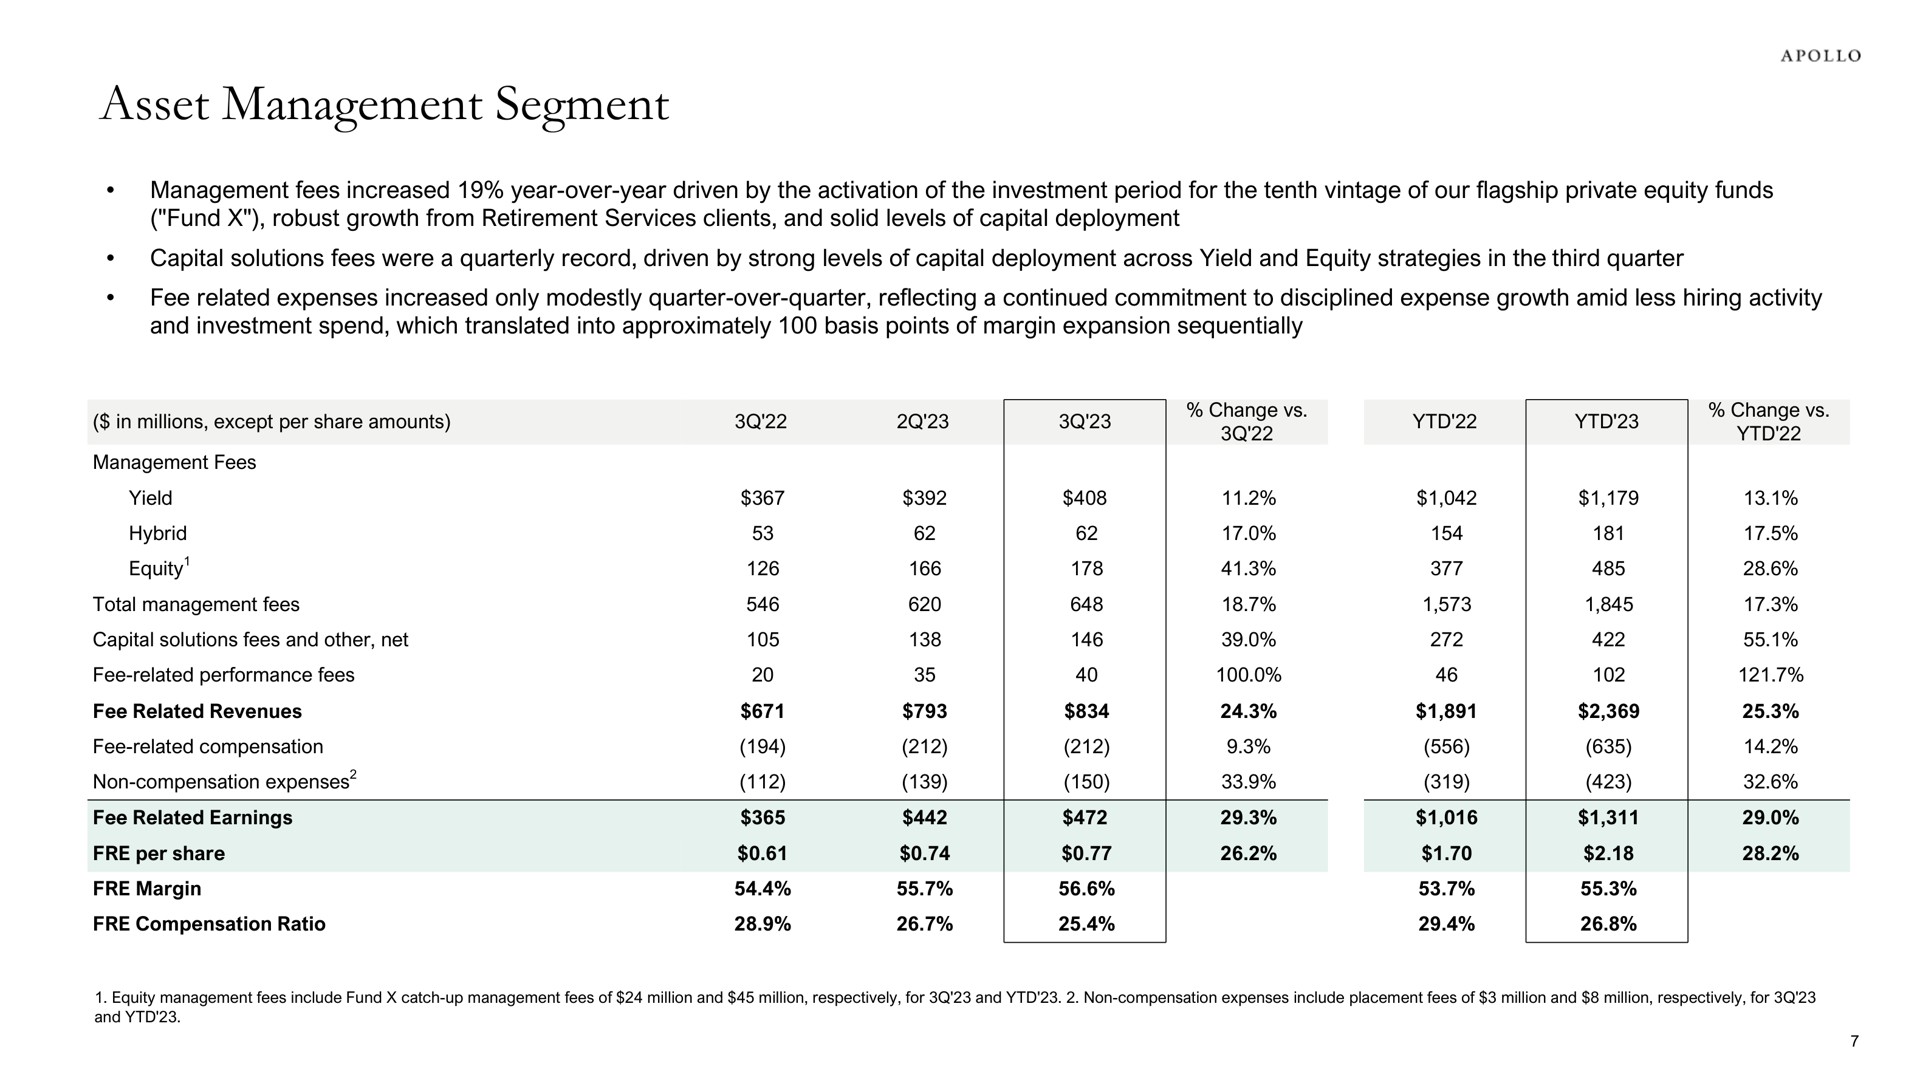 asset management segment in millions except per share amounts aes i a me | Apollo Global Management